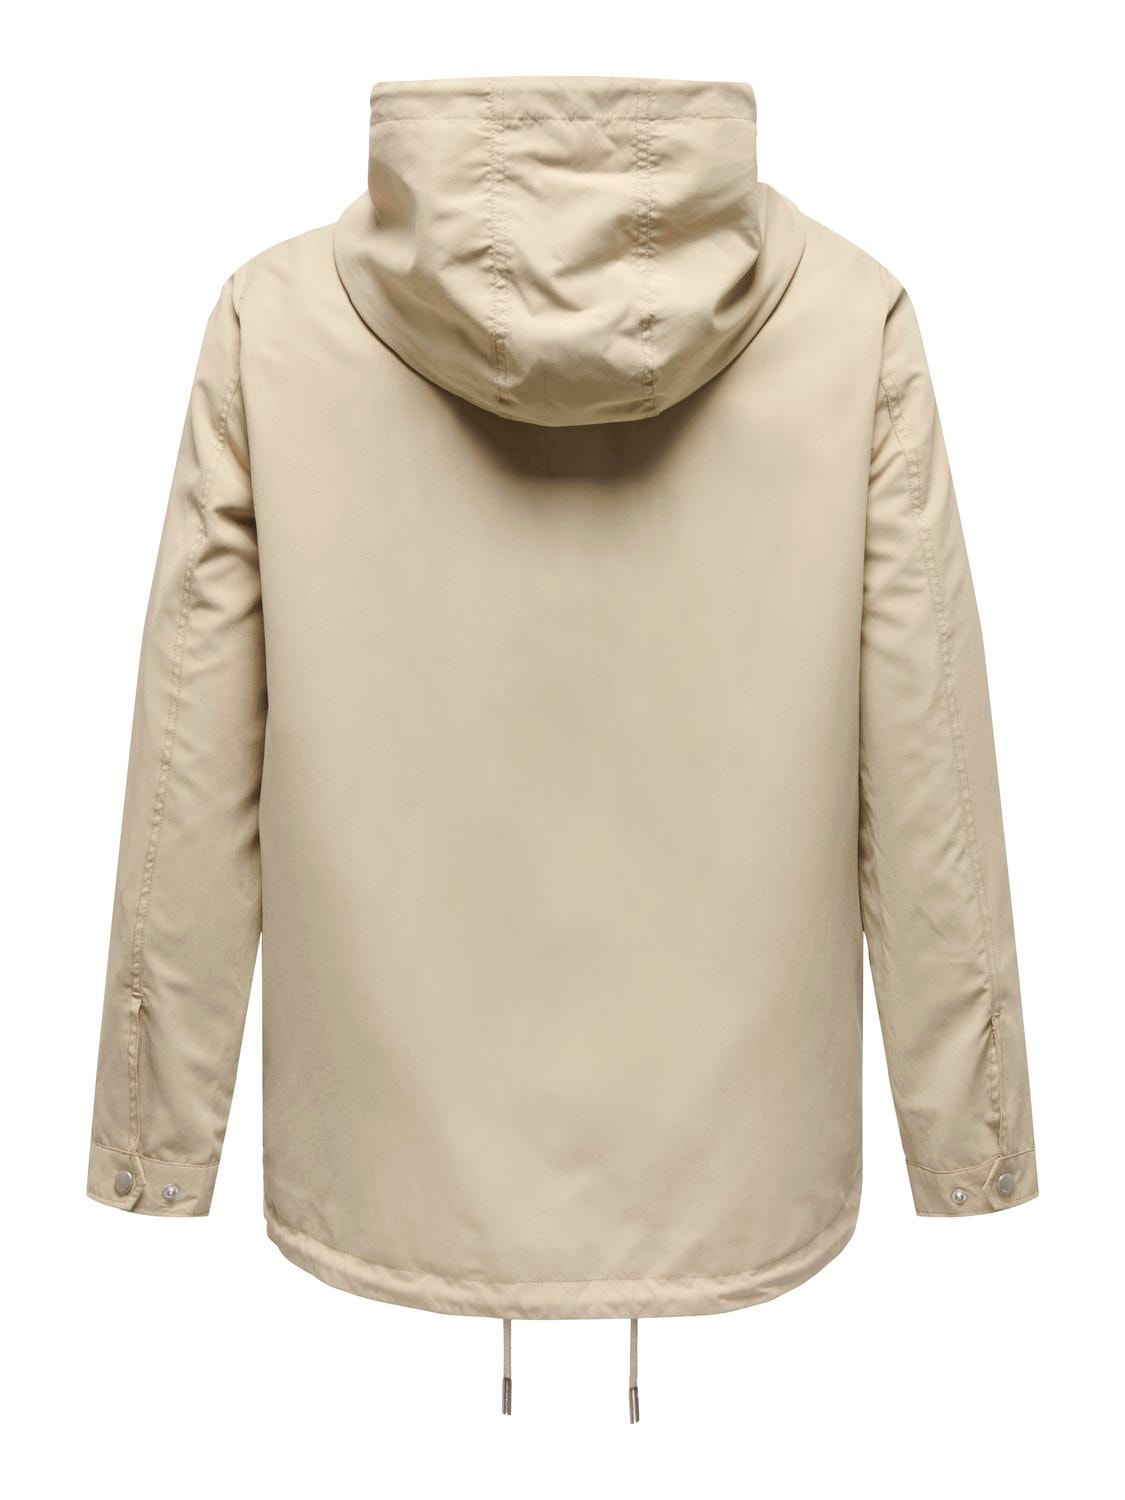 ONLY Hood Curve Jacket -White Pepper - 15311588